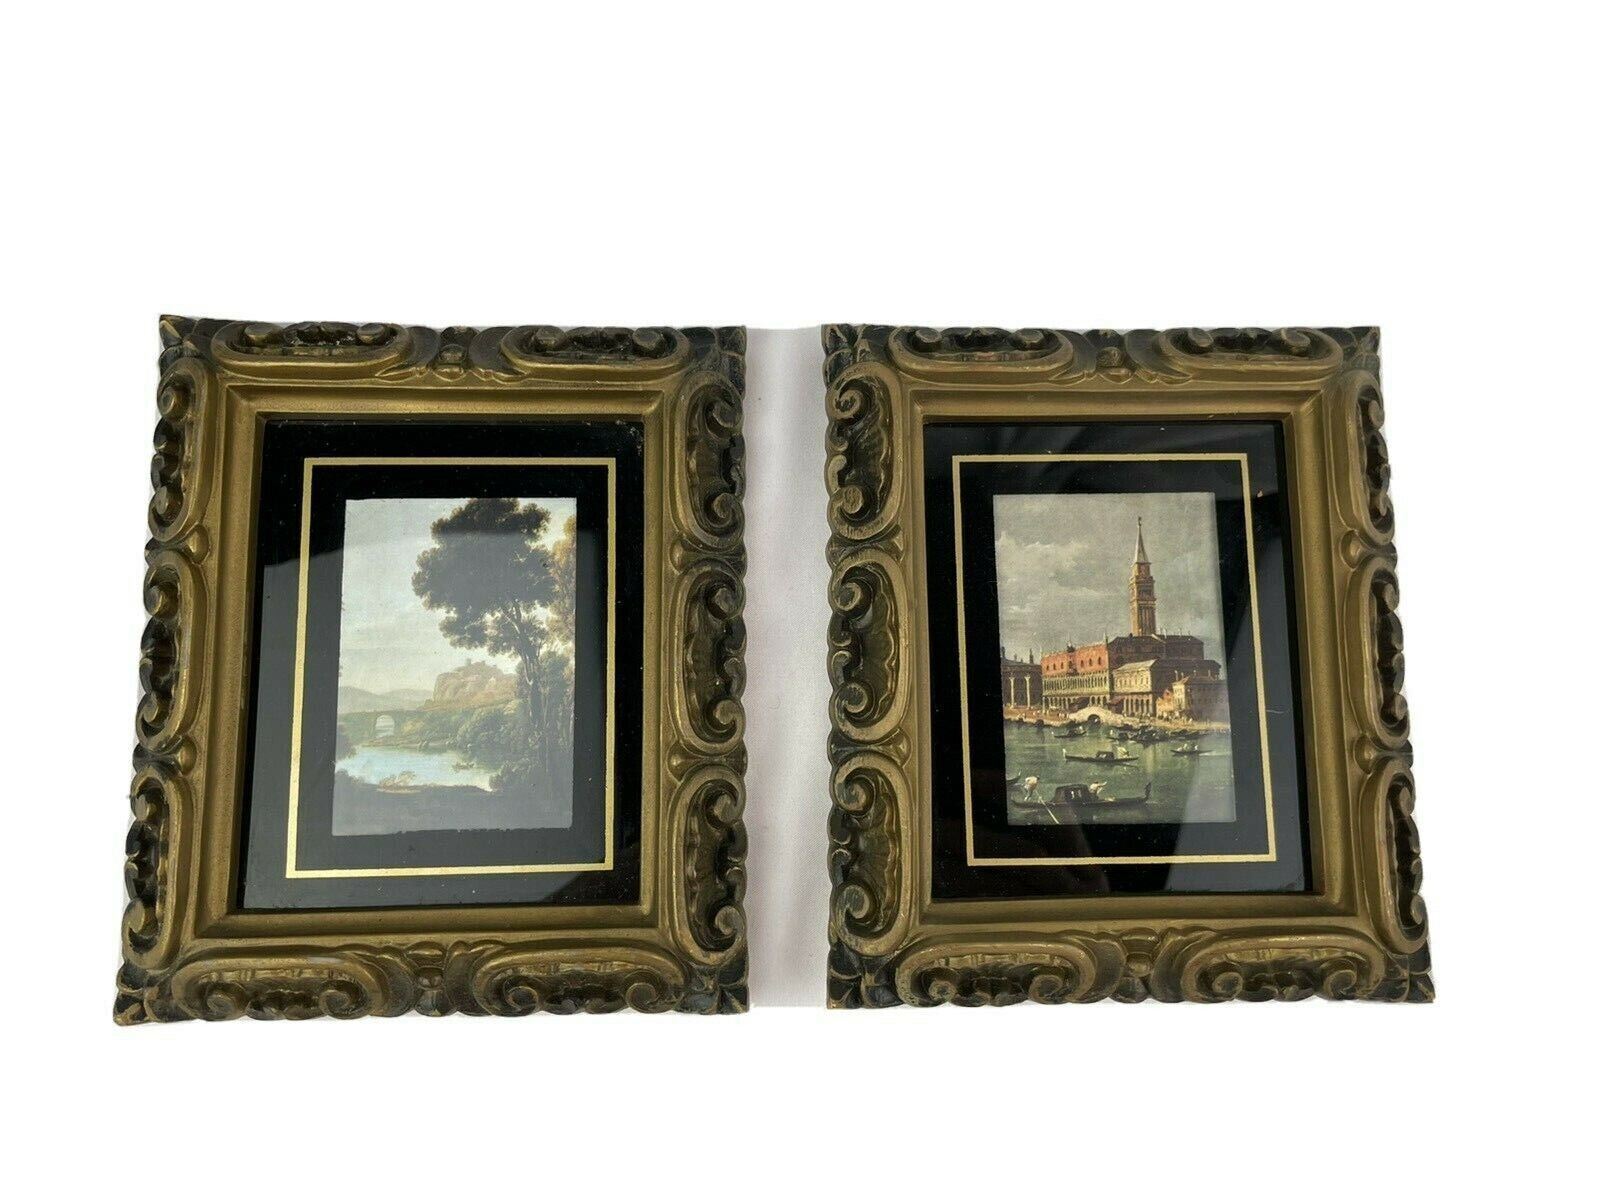 Vintage Gold Framed Italian Wall Prints Duke's Place Country Life Set of 2